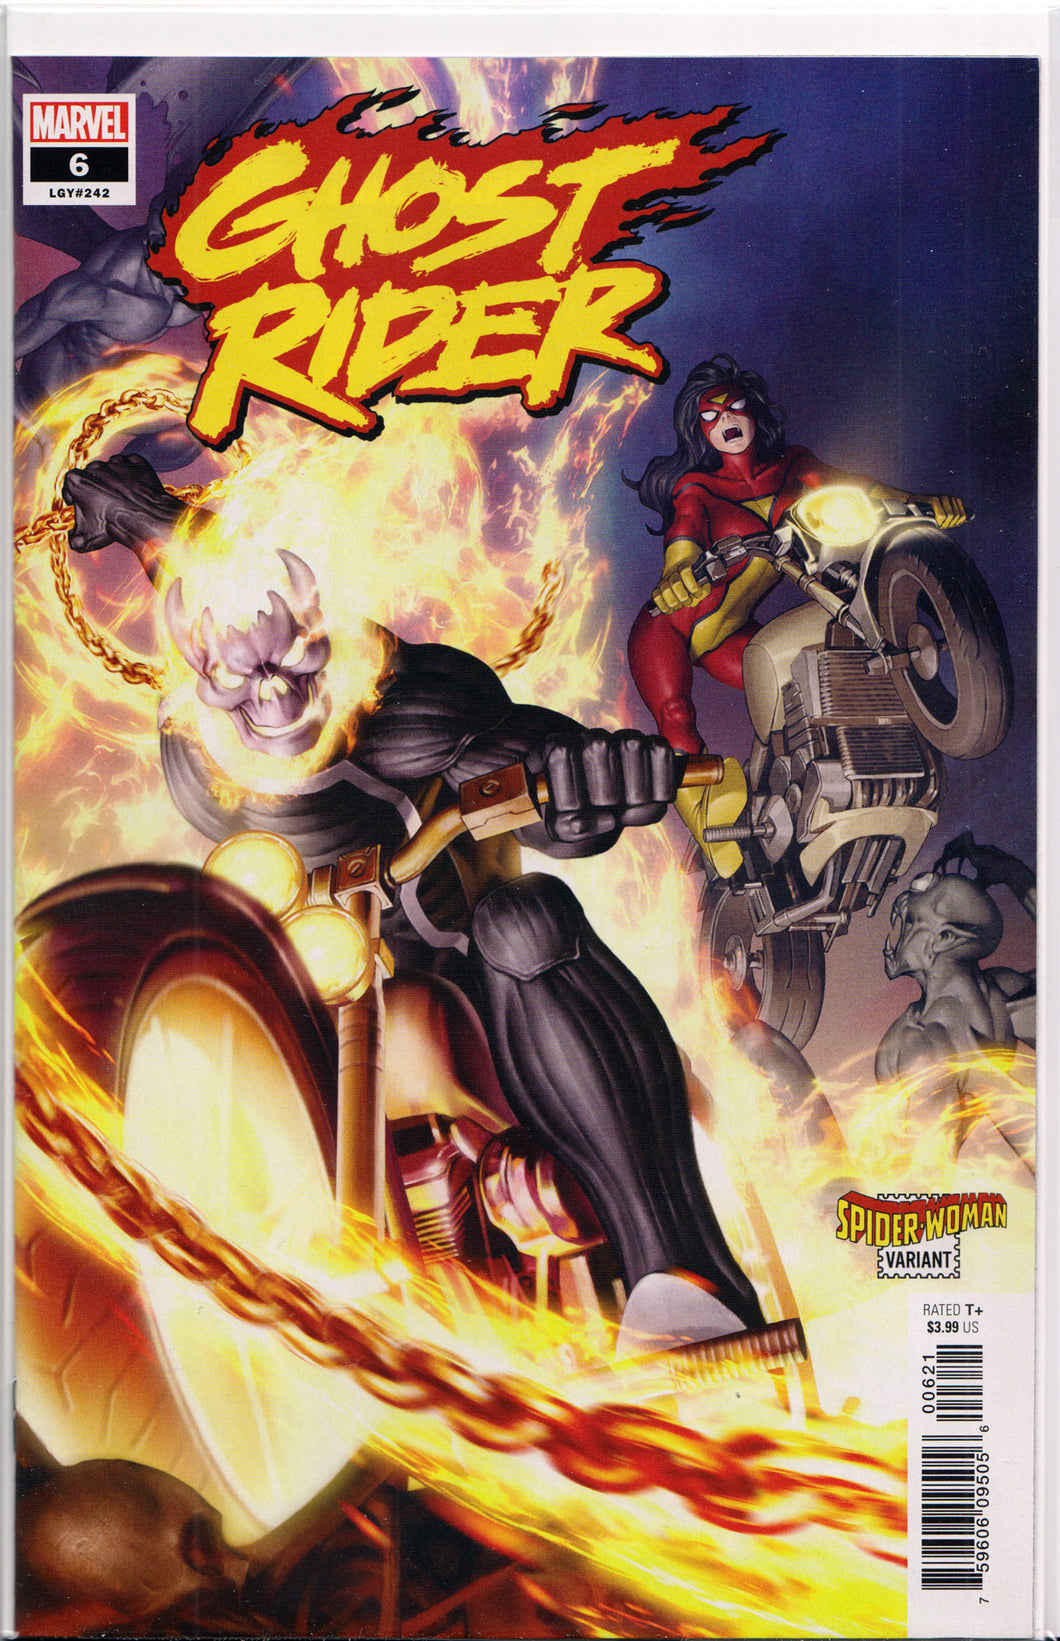 GHOST RIDER #6 (SPIDER-WOMAN VARIANT)(2020) COMIC BOOK ~ Marvel Comics